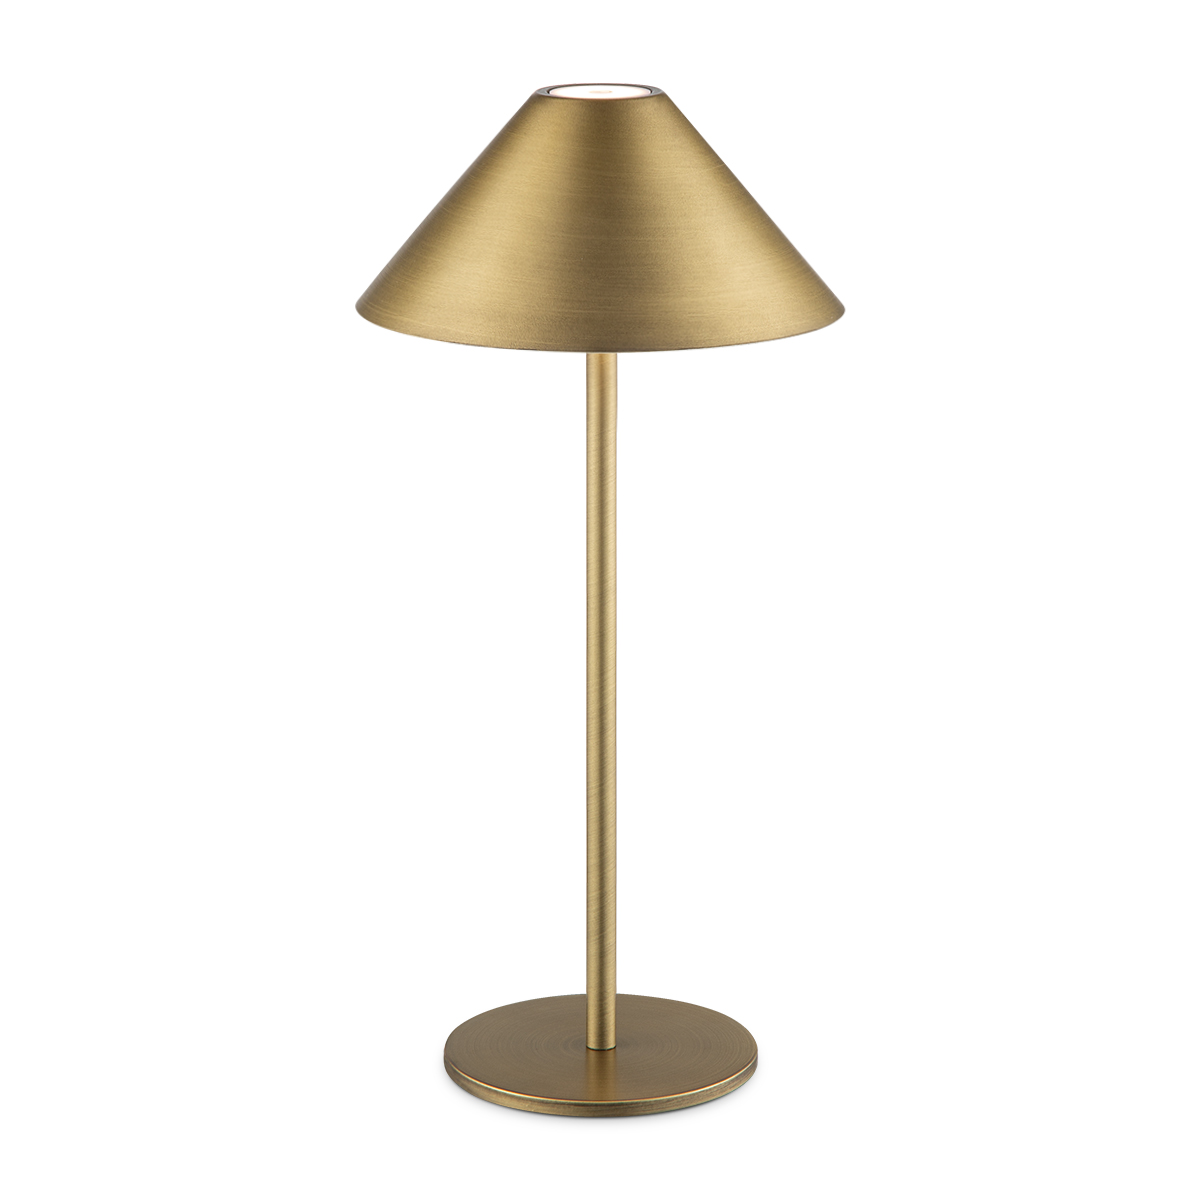 Tangla lighting - TLT7643-01BS - LED table lamp - rechargeable plastic and metal - brass - umbrella